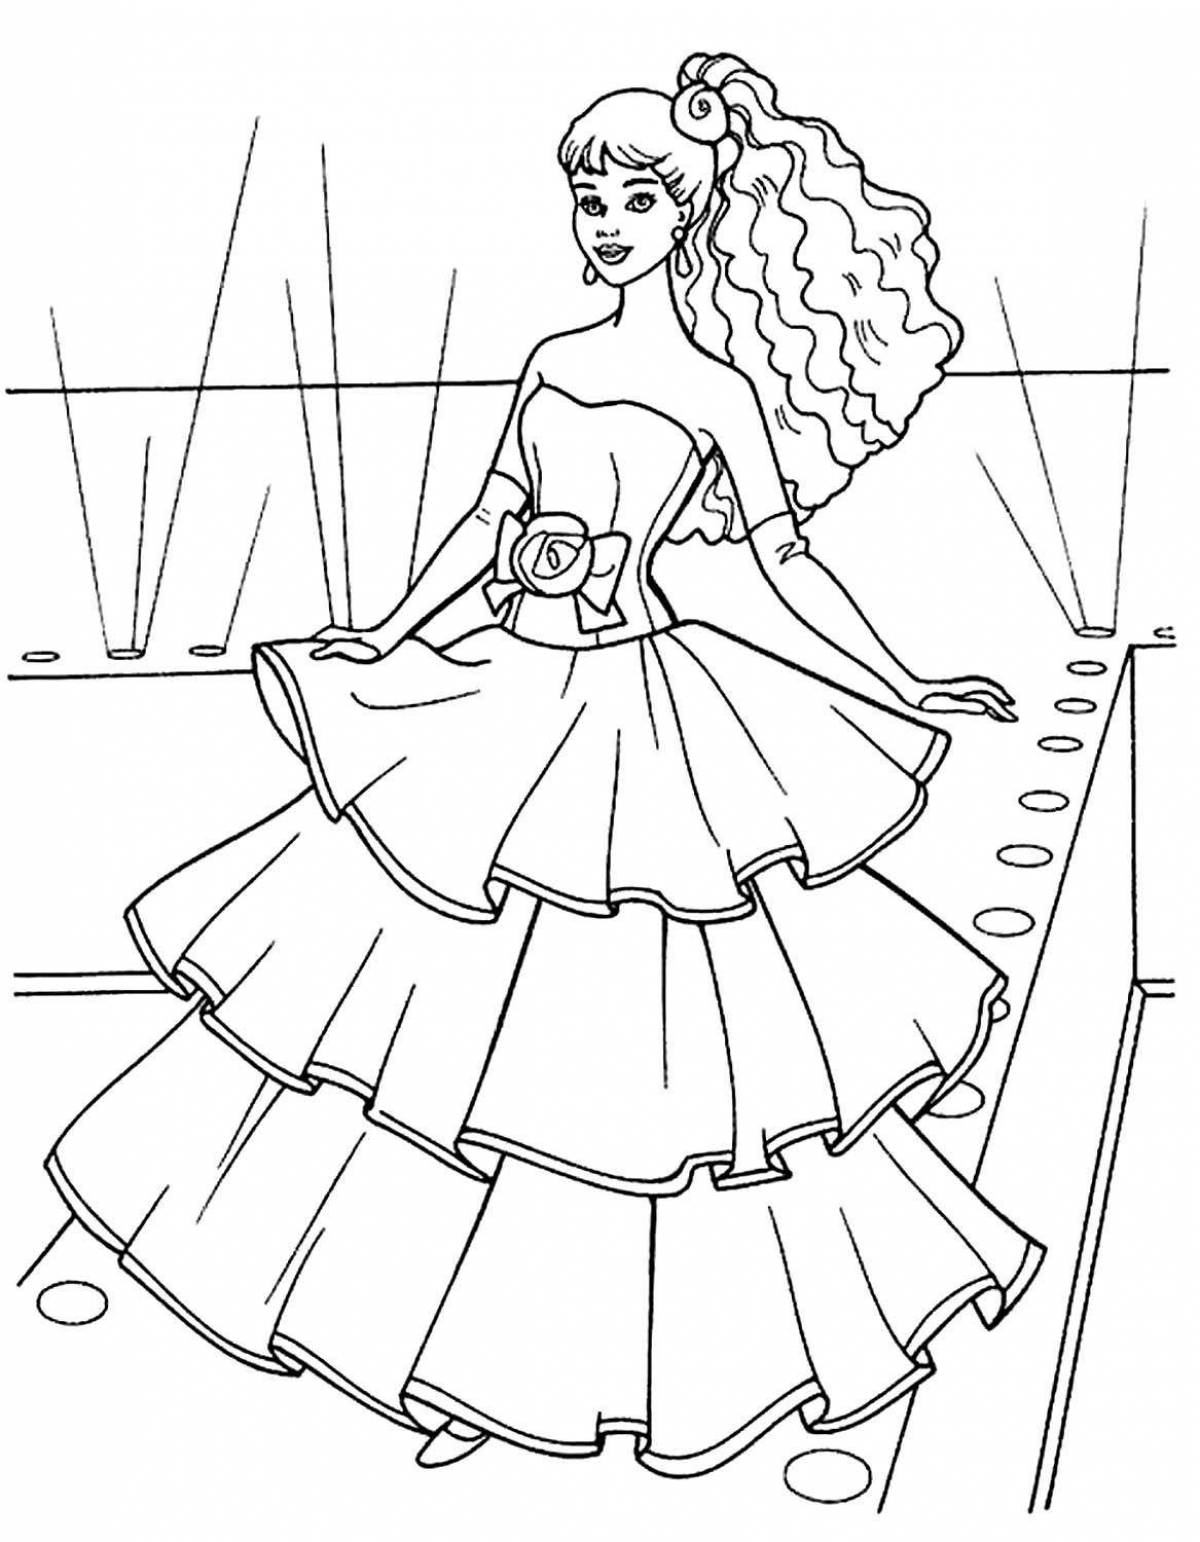 Coloring vogue barbie outfits